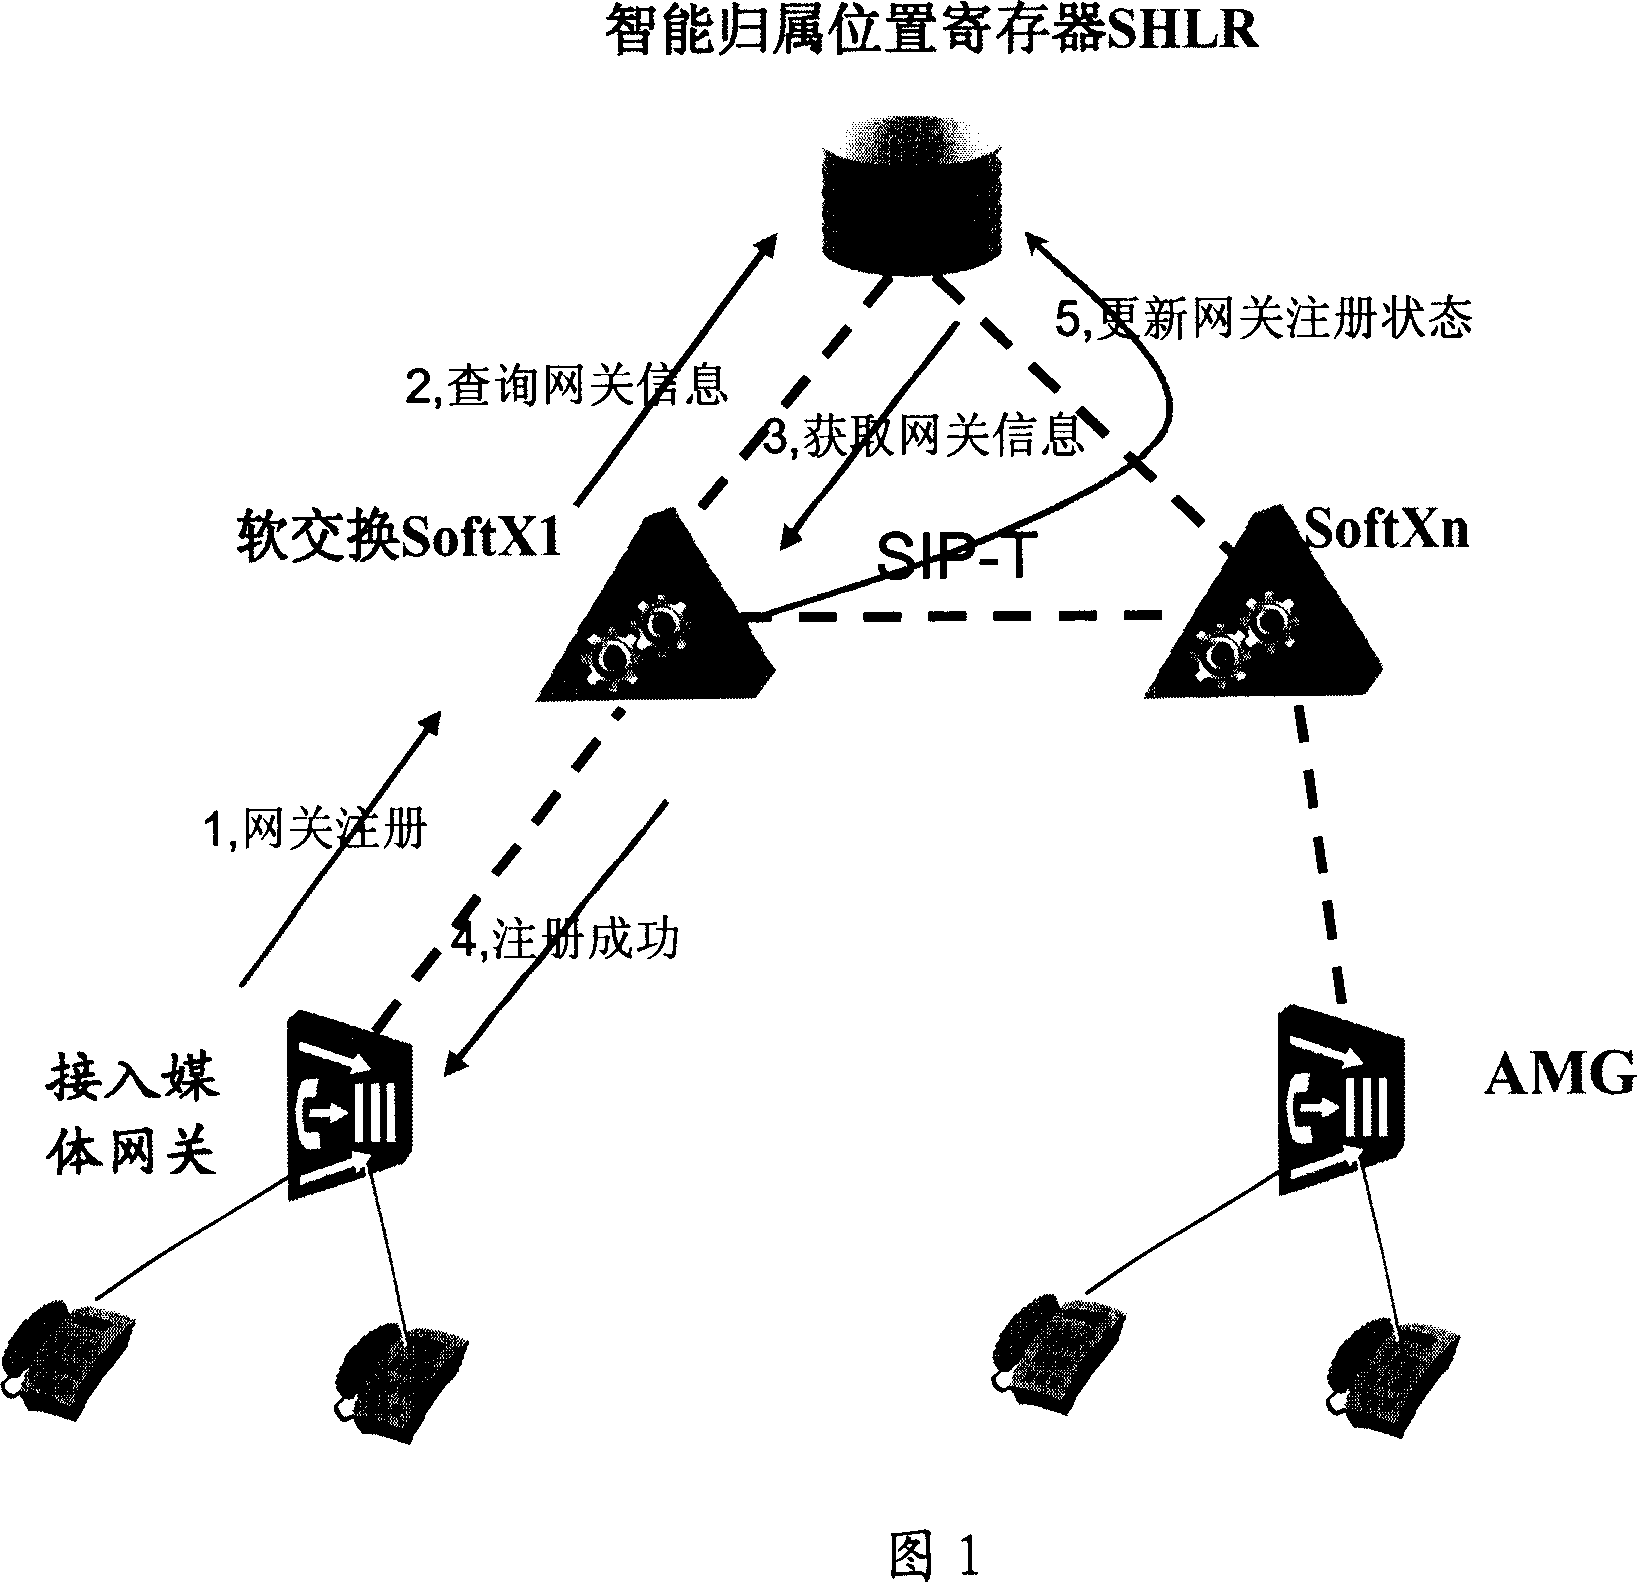 Realizing device and method for multiple homing in next generation network